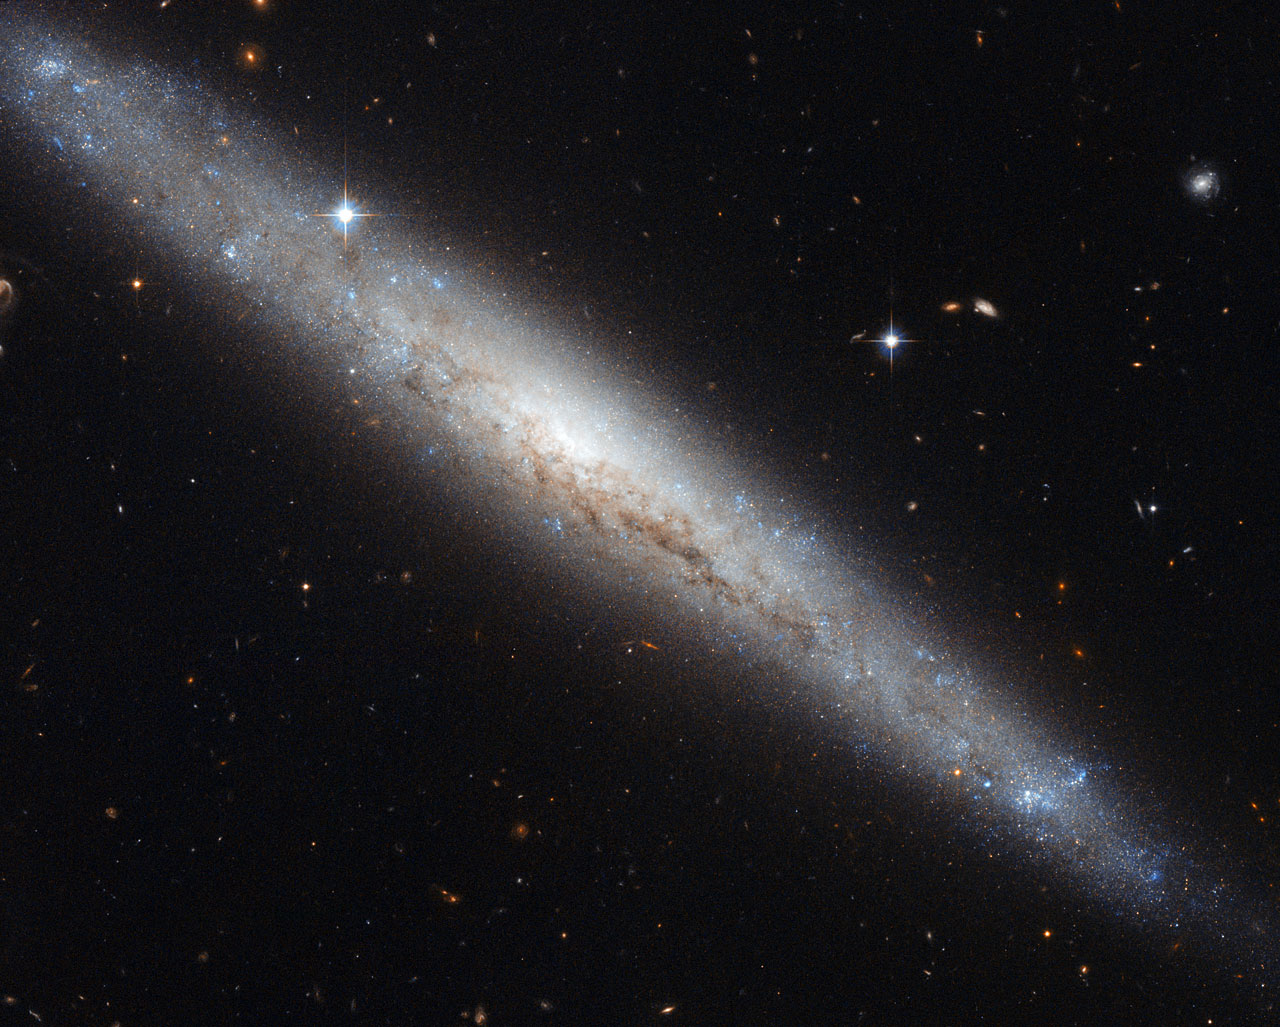 55 million light years from the Sun: Hubble portrays dusty spiral galaxy